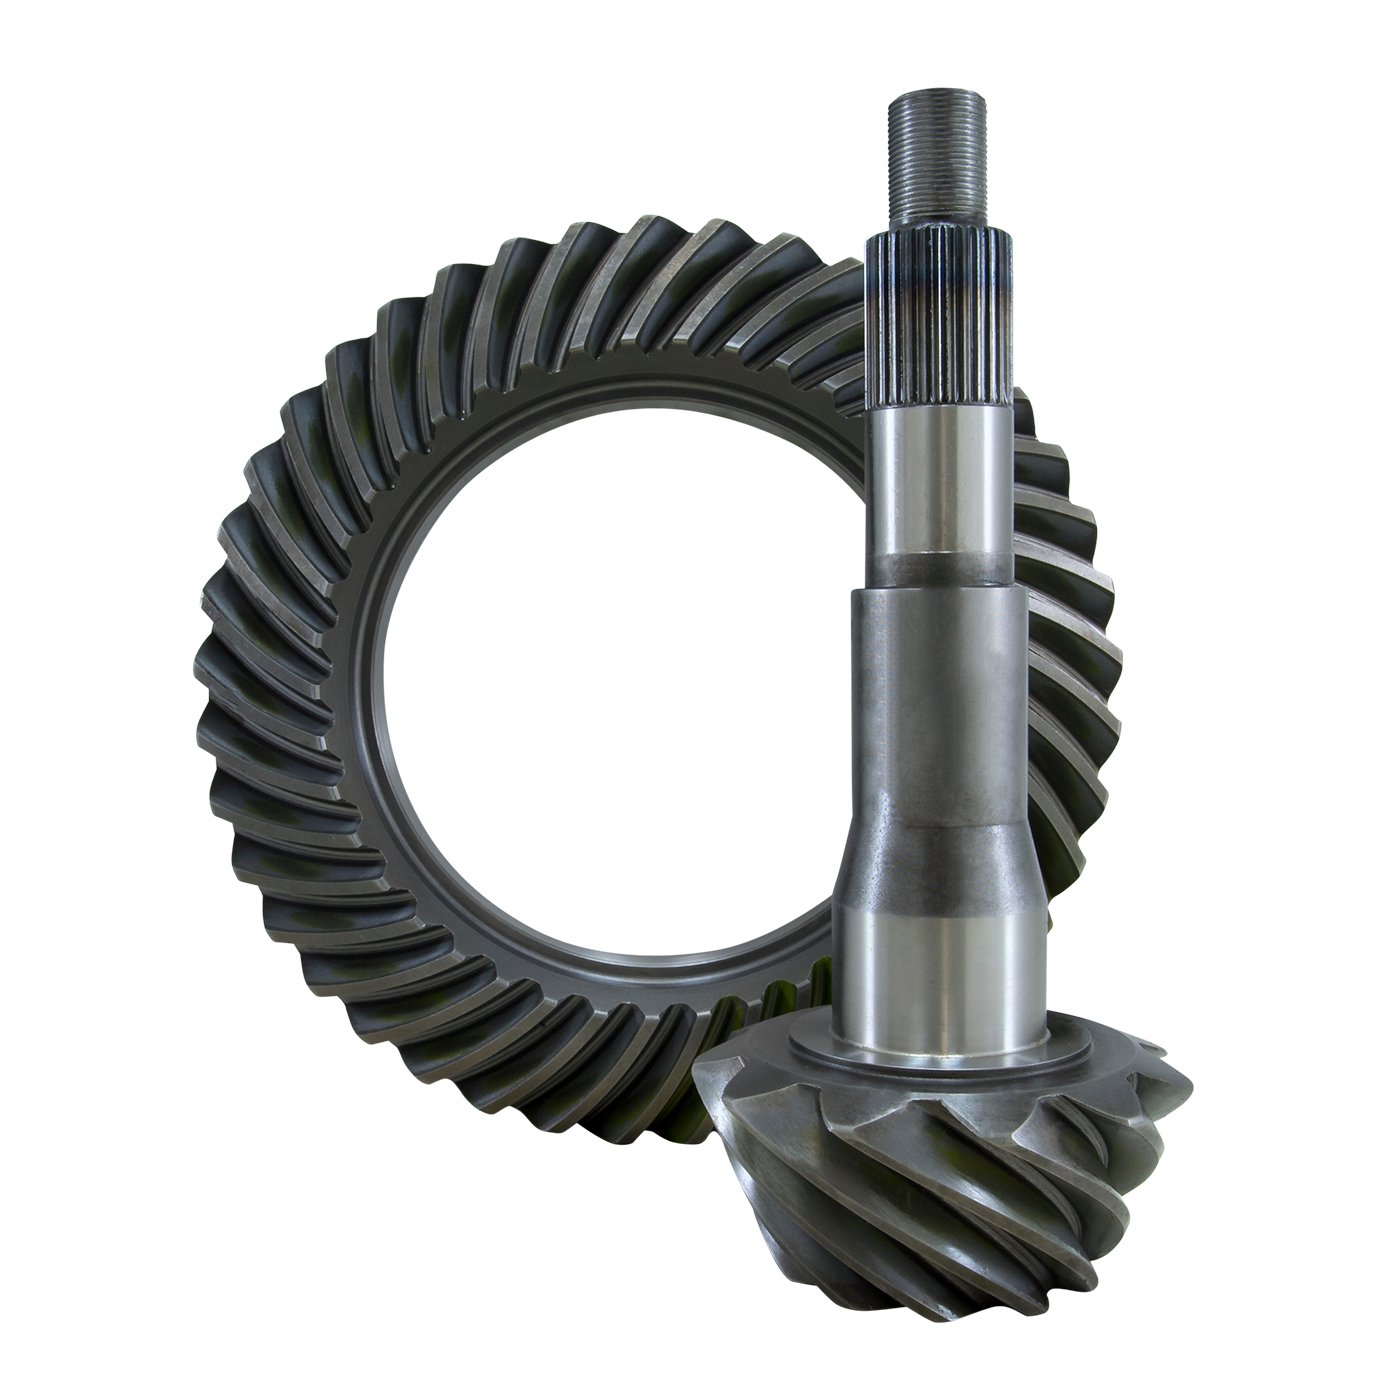 USA Standard 36433 Ring & Pinion Gear Set, For 2010 & Down Ford 10.5 in., 4.88 Ratio.